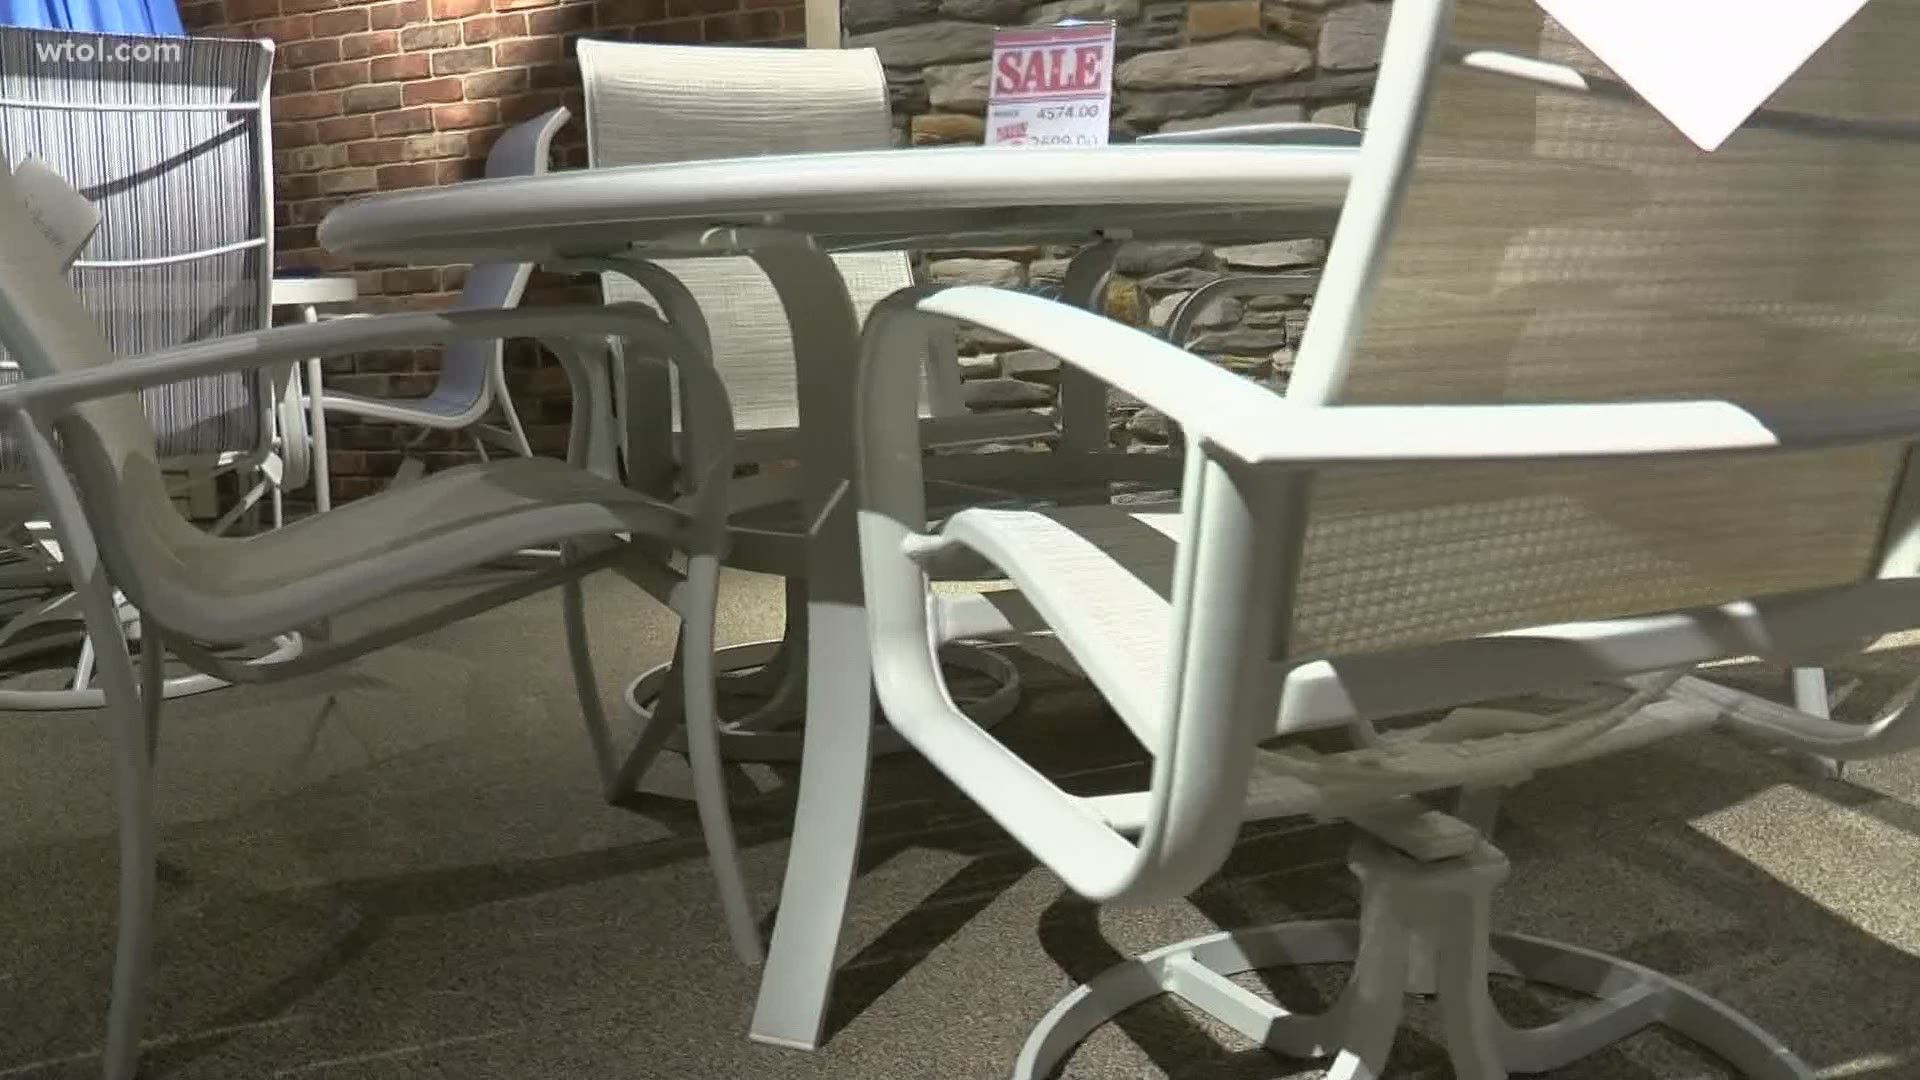 With wind gusts expected, it's smart to secure all your outdoor furniture and put together a safety kit for your home in case the power goes out.